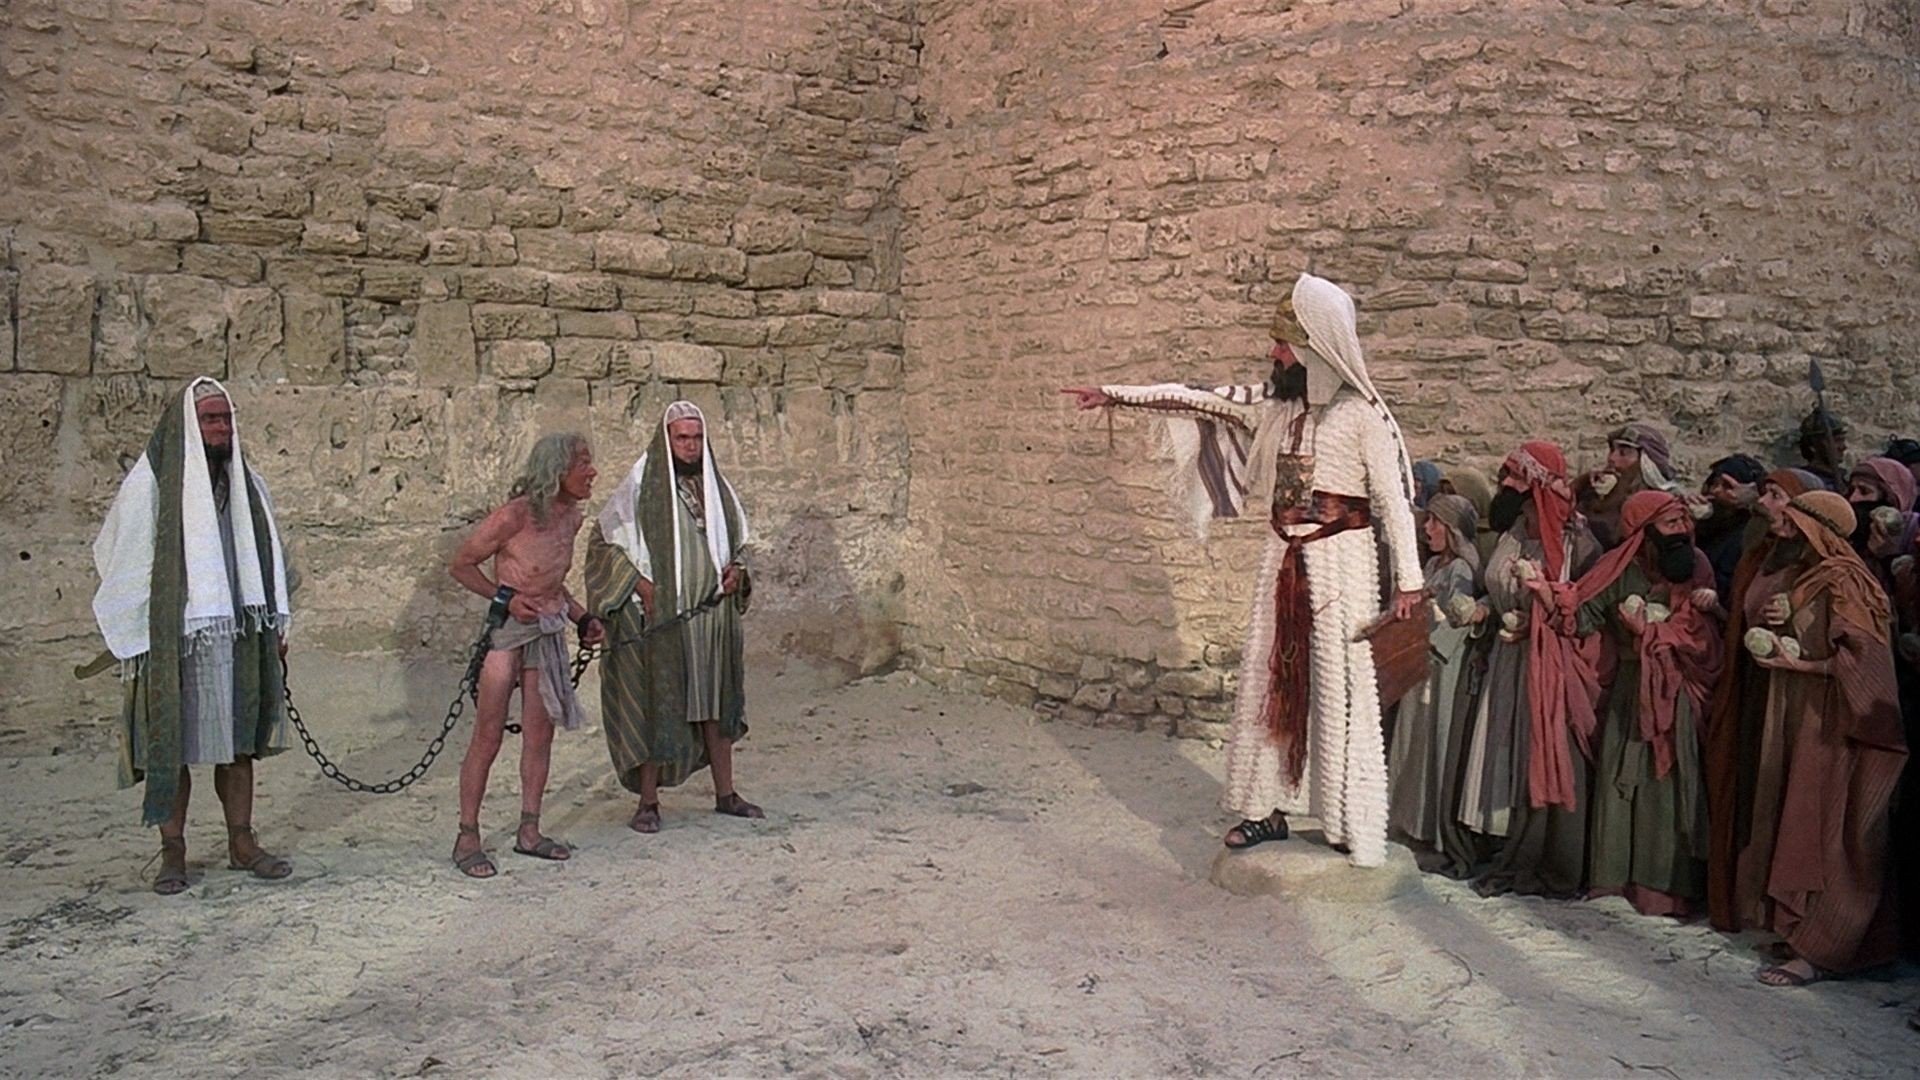 life of brian movie review